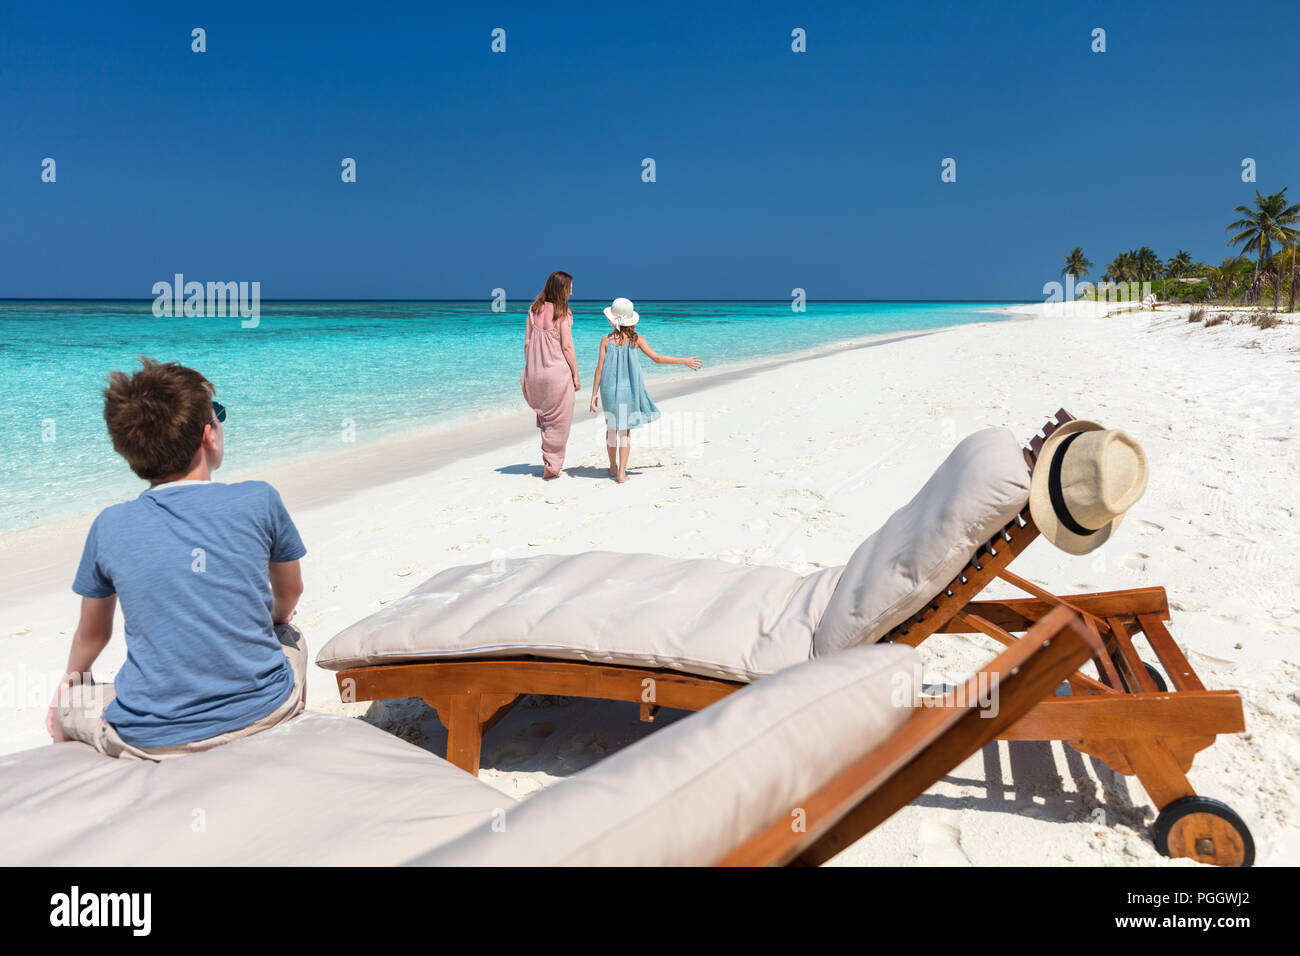 Family mother and kids enjoying tropical beach vacation in luxury resort Stock Photo